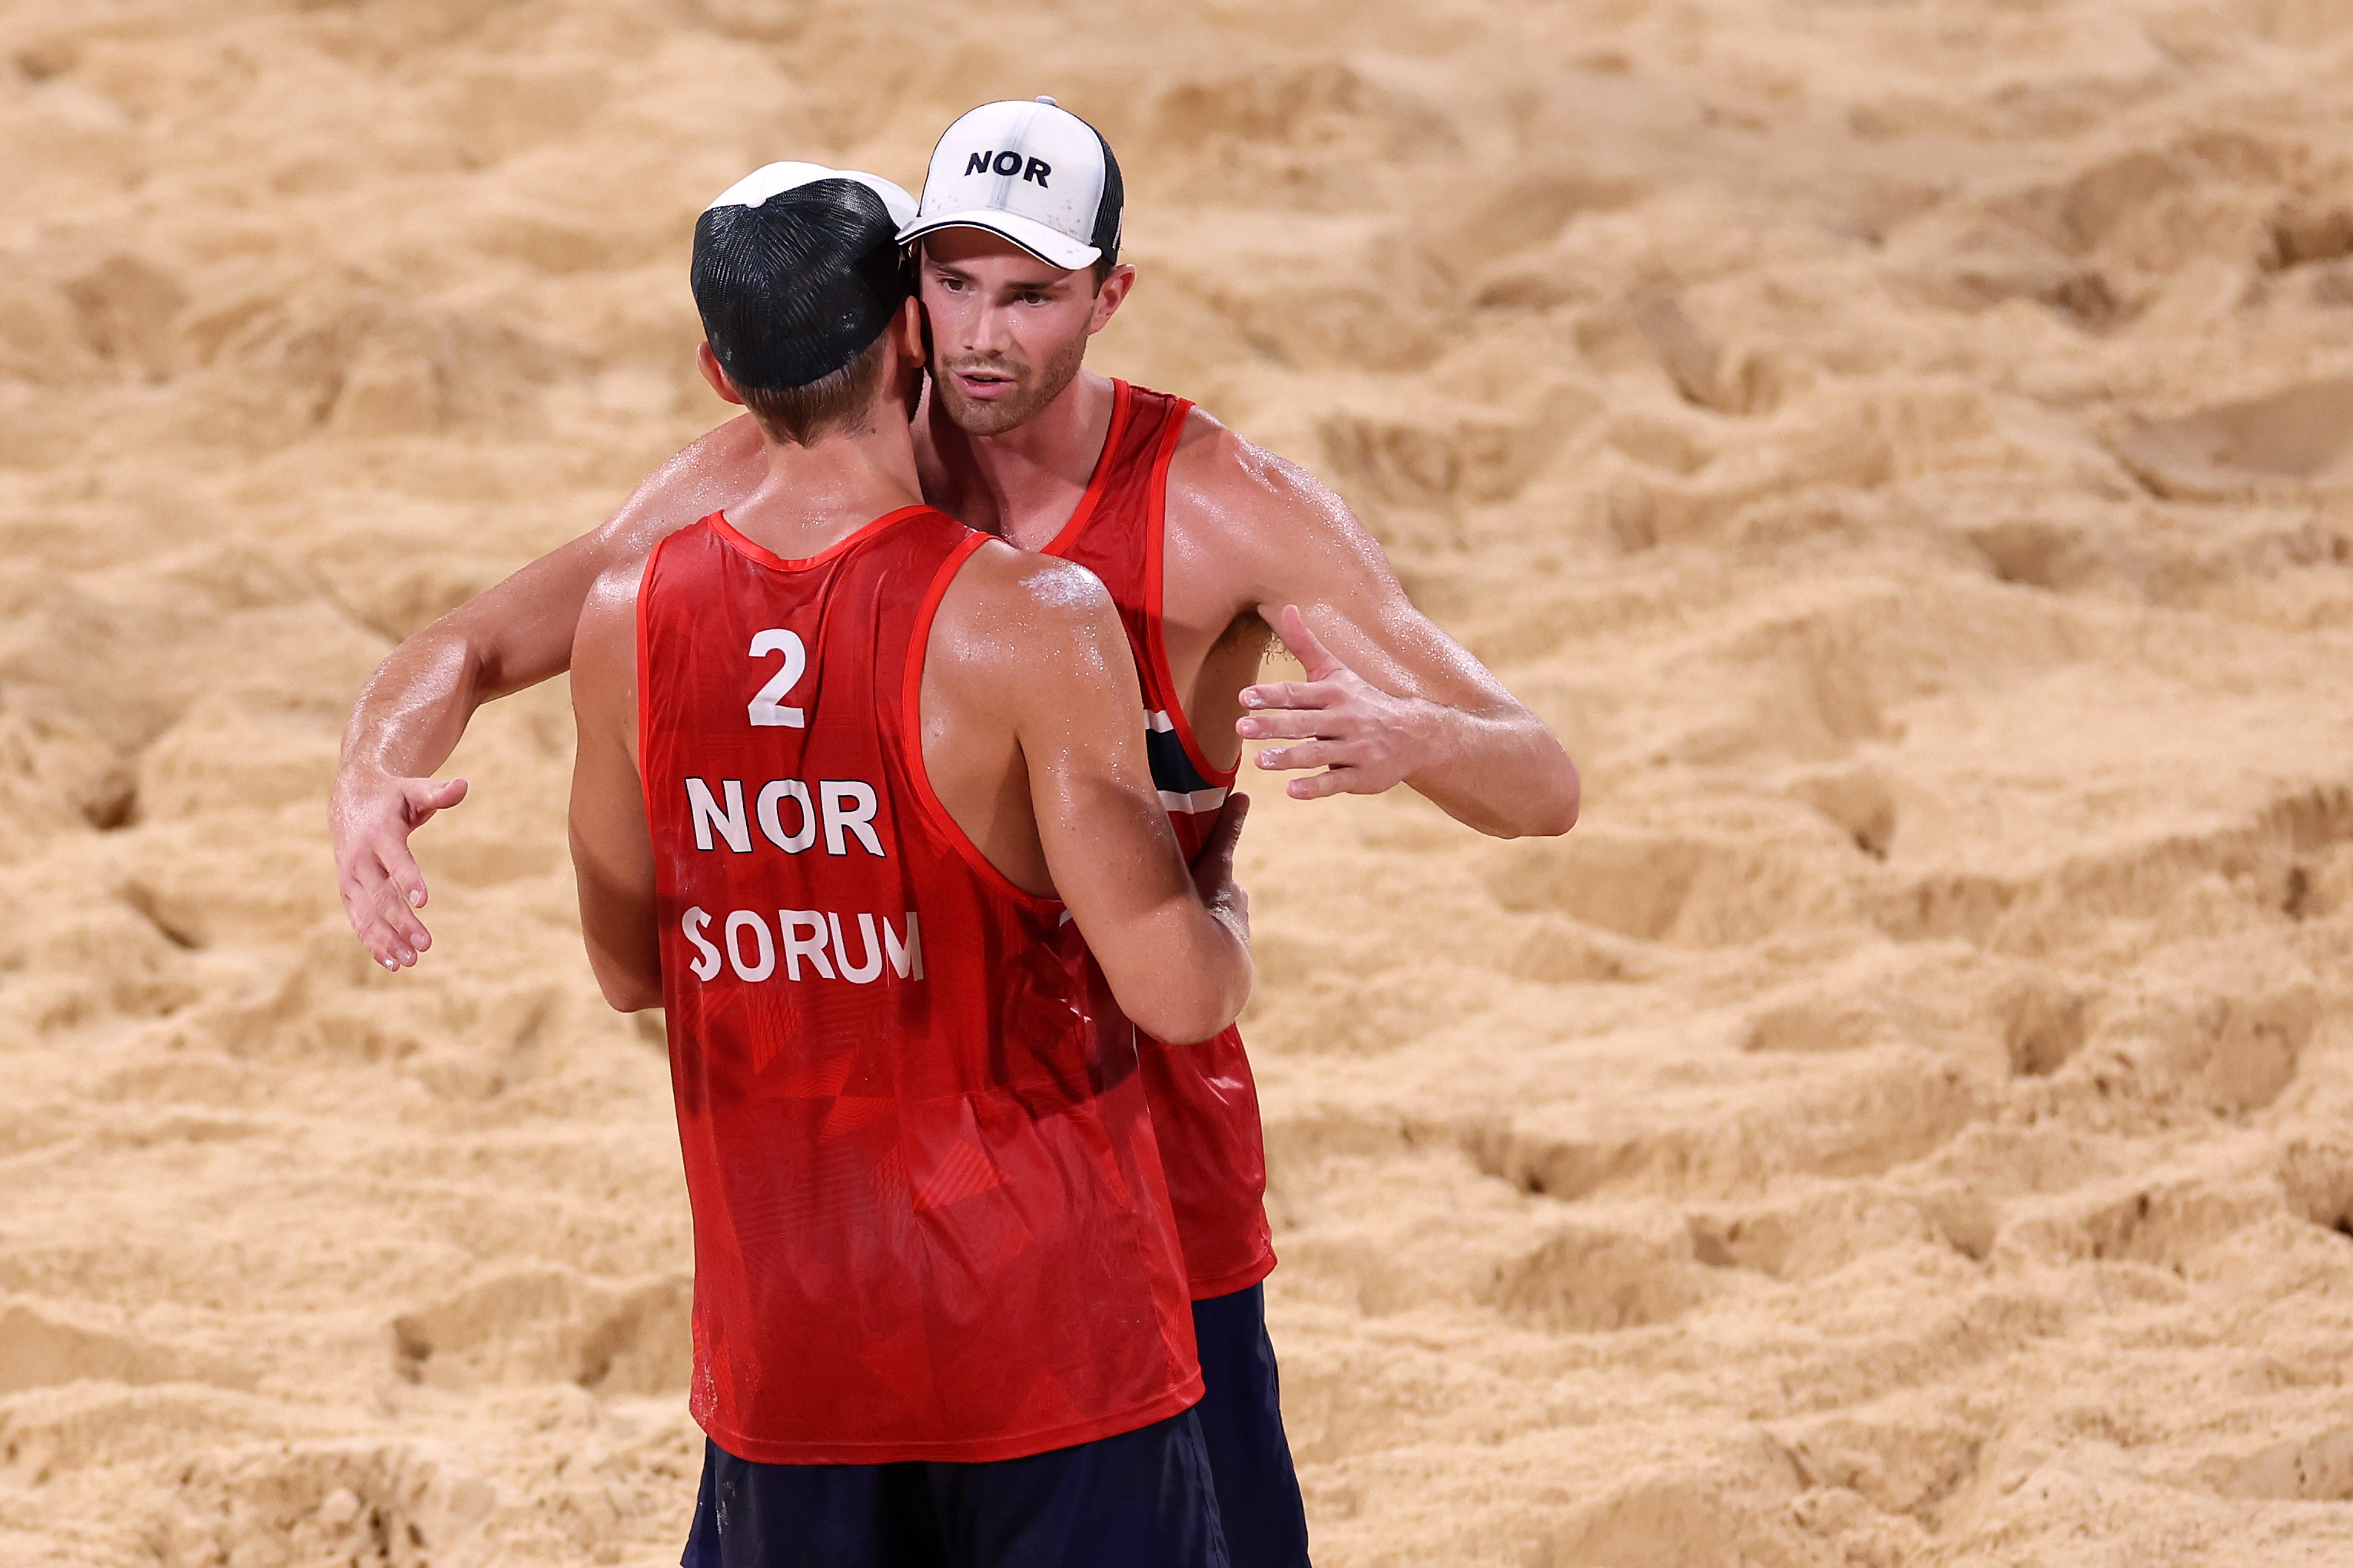 Anders Berntsen Mol and Christian Sandlie Sorum of Team Norway react after they defeated Team Latvia during Men’s Semifinal beach volleyball on day thirteen of the Tokyo 2020 Olympic Games at Shiokaze Park on August 05, 2021 in Tokyo, Japan.